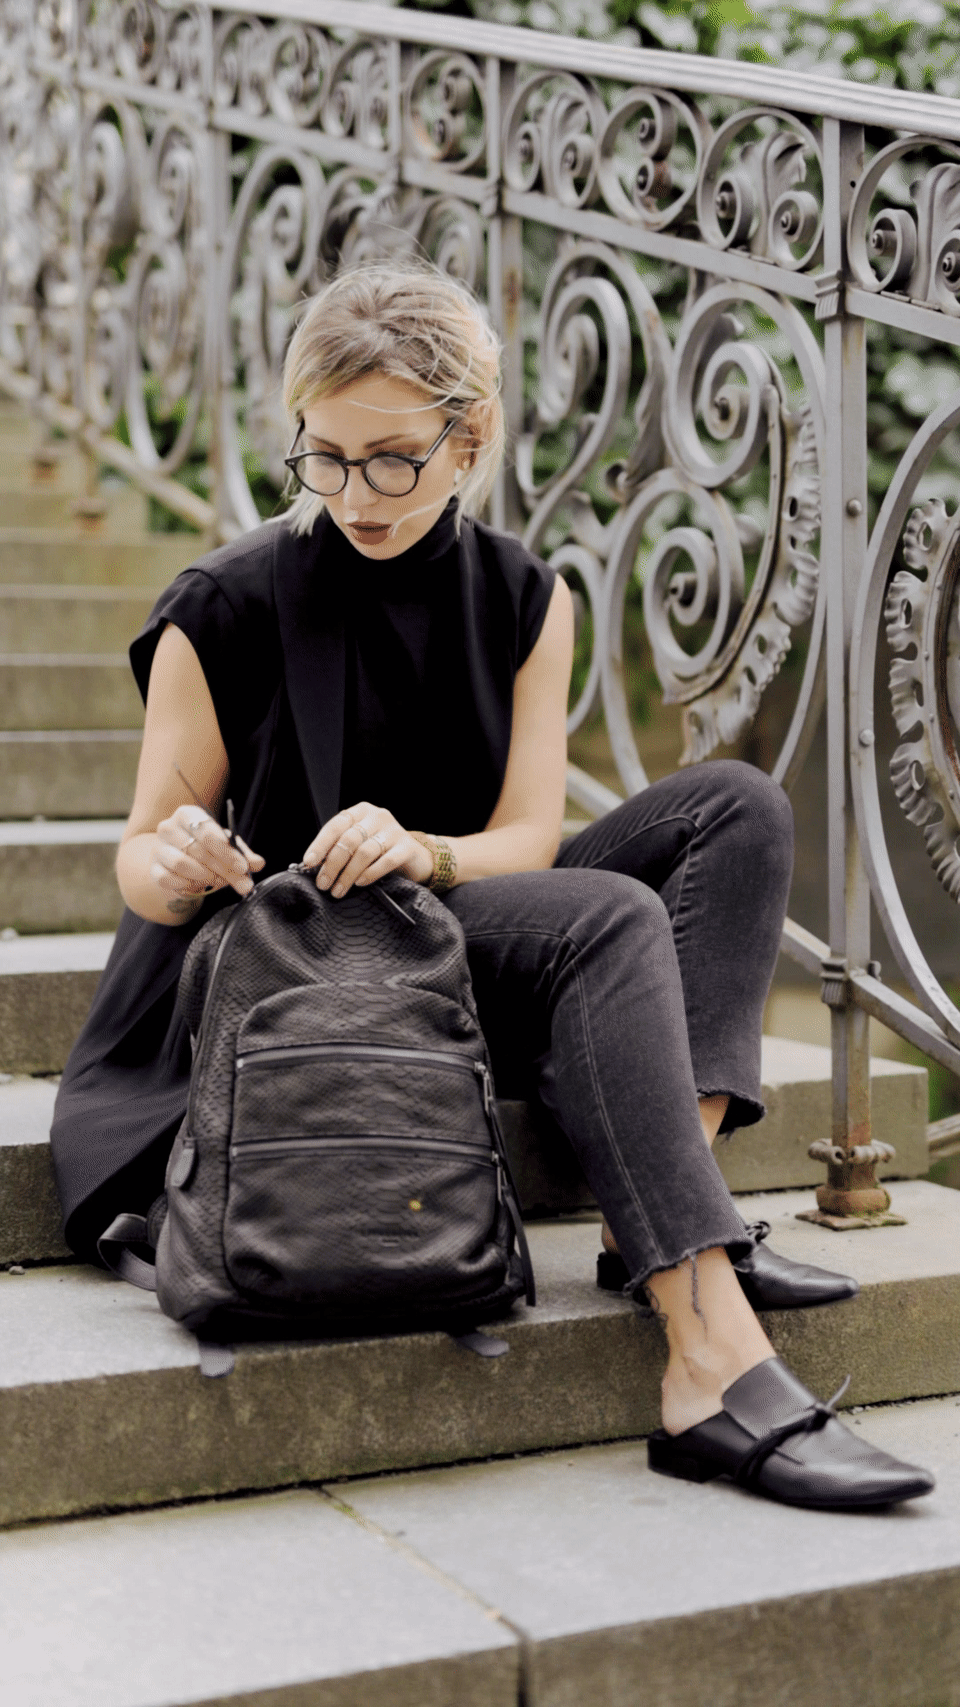 all black everything | outfit, fashion | style: edgy, black, dark, timeless, chic | backpack from Liebeskind, 3.1 Philip Lim Mules